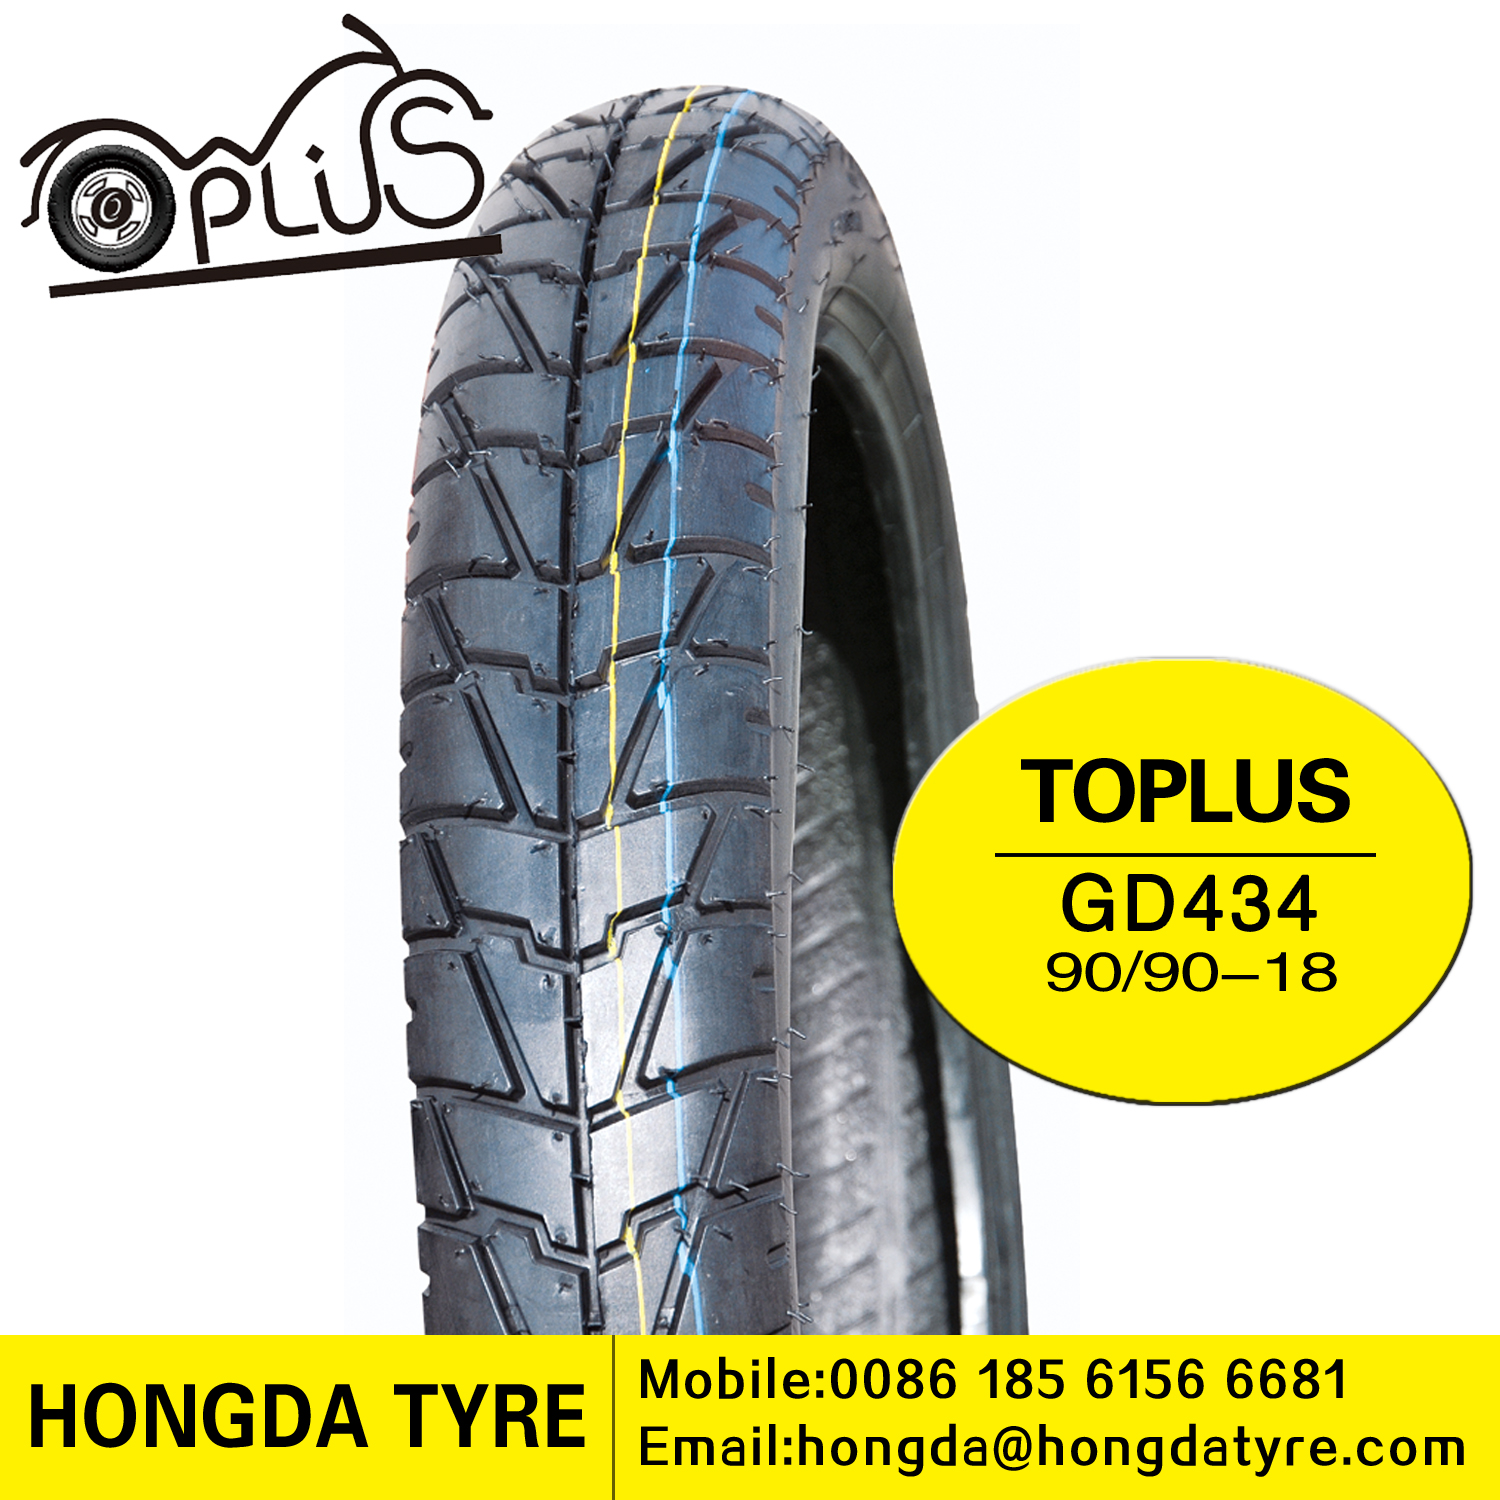 Motorcycle tyre GD434